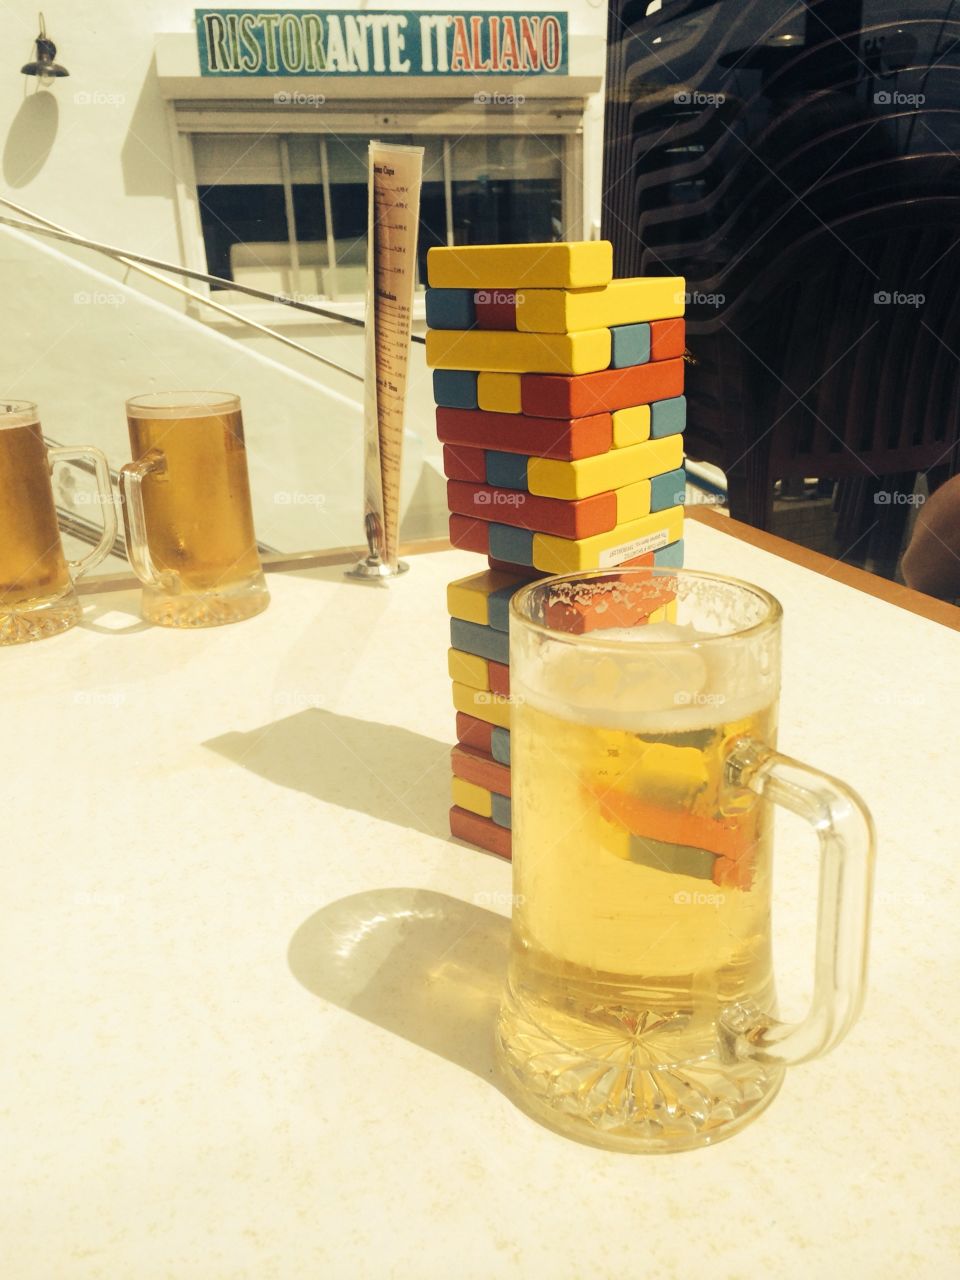 Beer and Jenga - what more do you need?